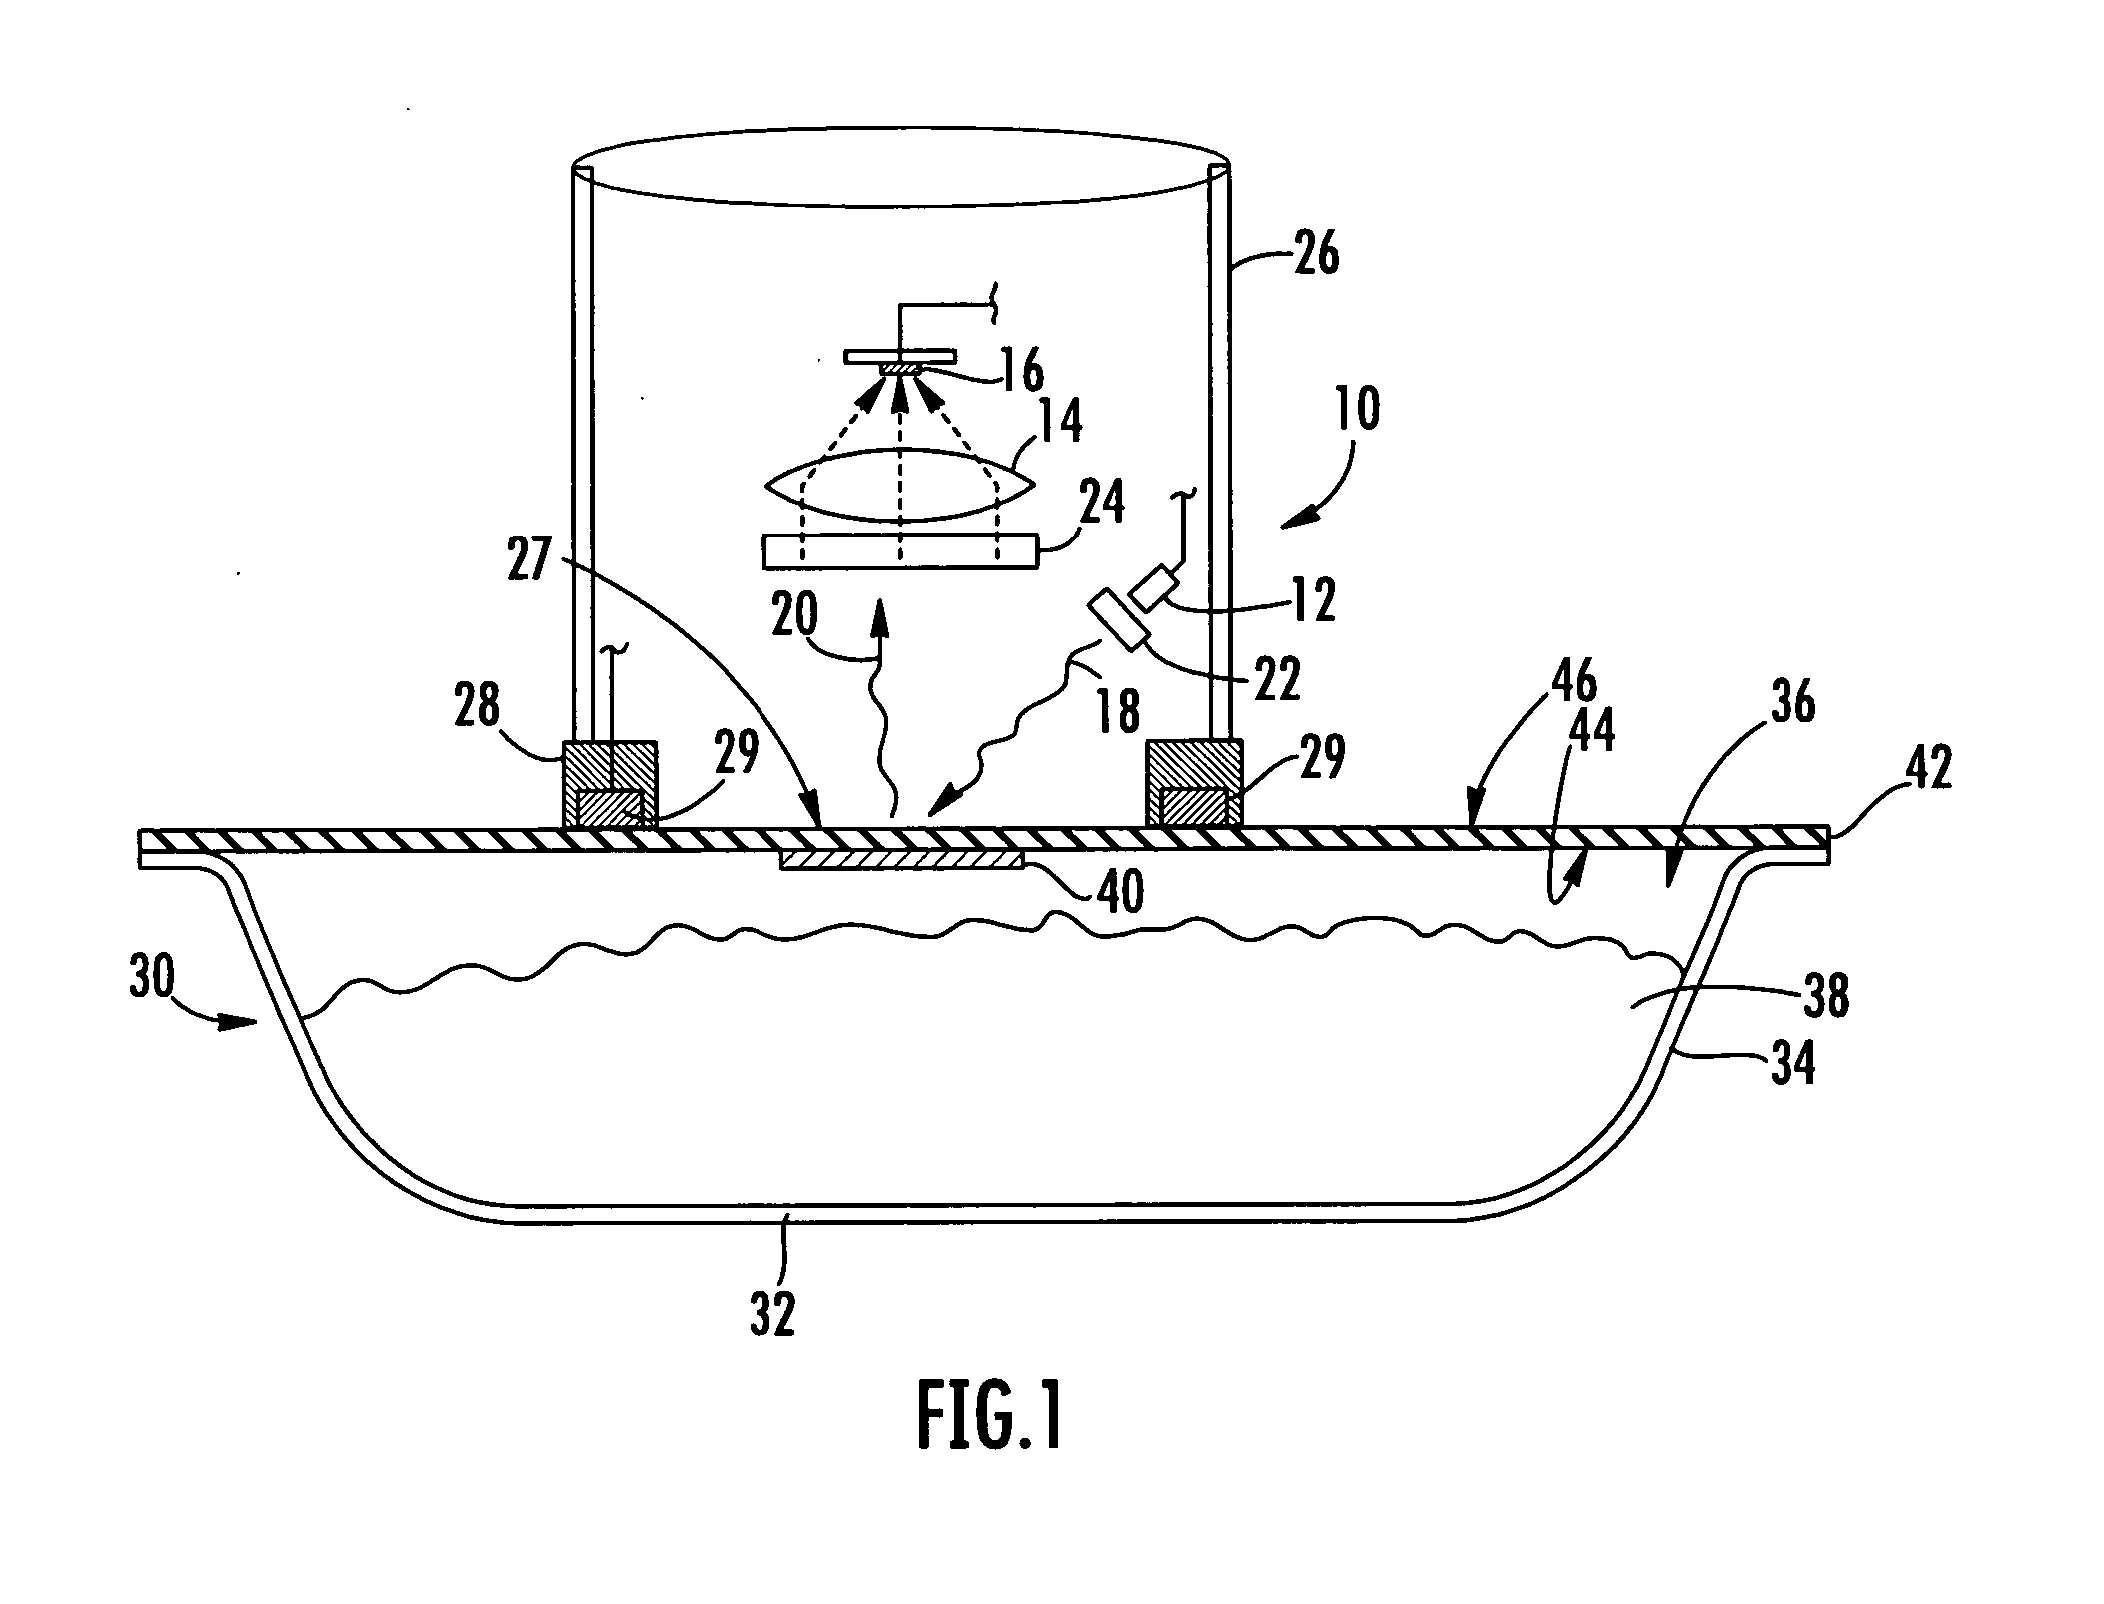 Non-invasive method of determining oxygen concentration in a sealed package